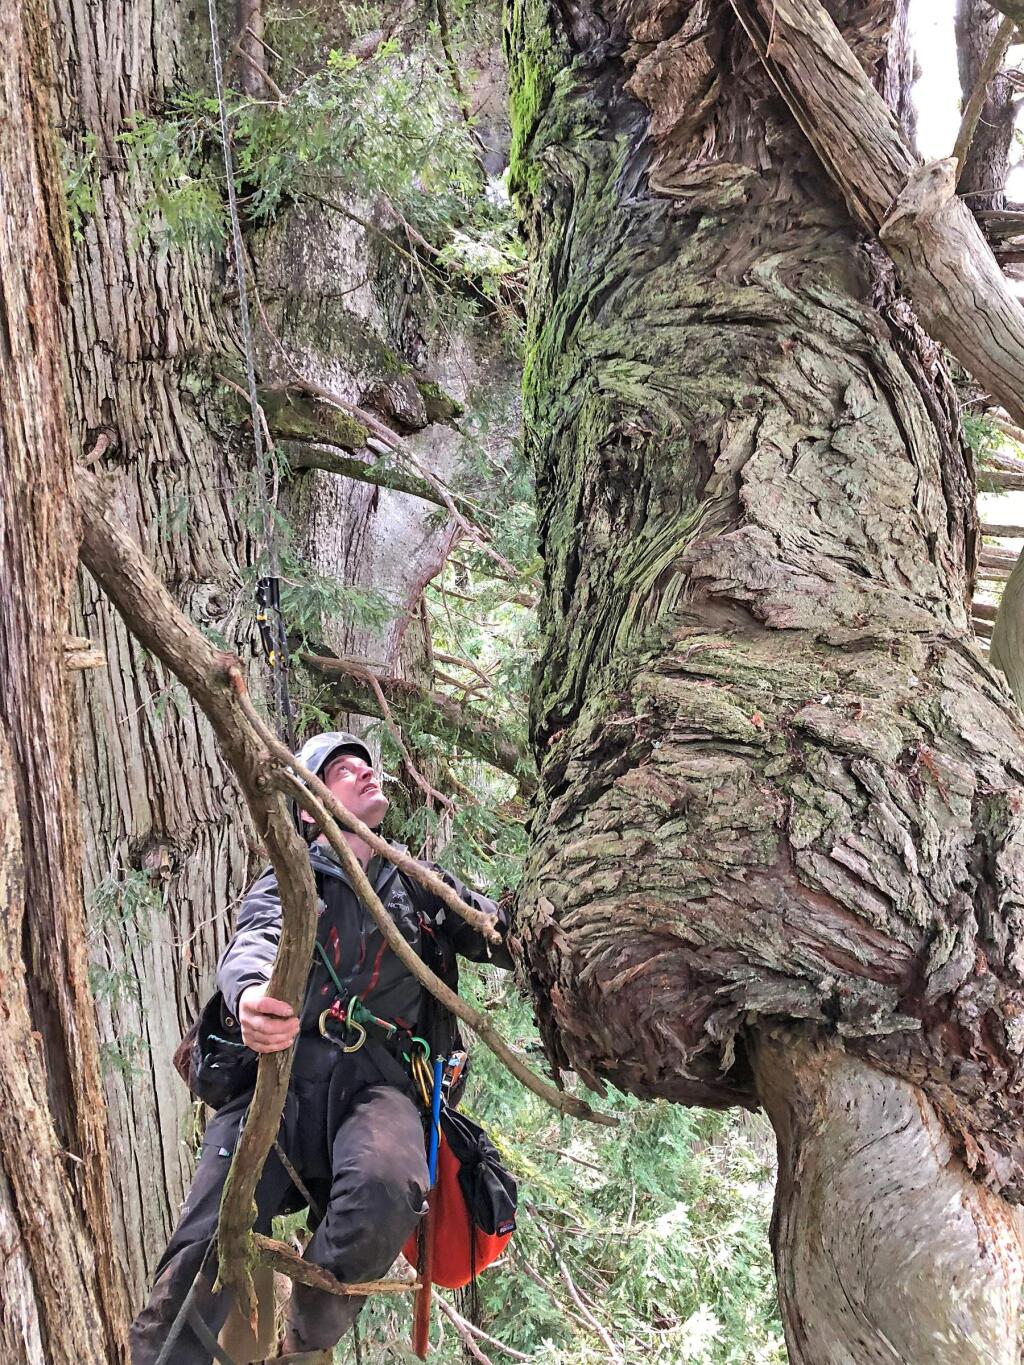 Steve Sillett of Humboldt State climbs in the canopy of a coast redwood forest, researching what makes big trees grow so large and survive so long. He'll lecture on the subject at Quarryhill Botanical Center on July 29. (Marie Antoine)